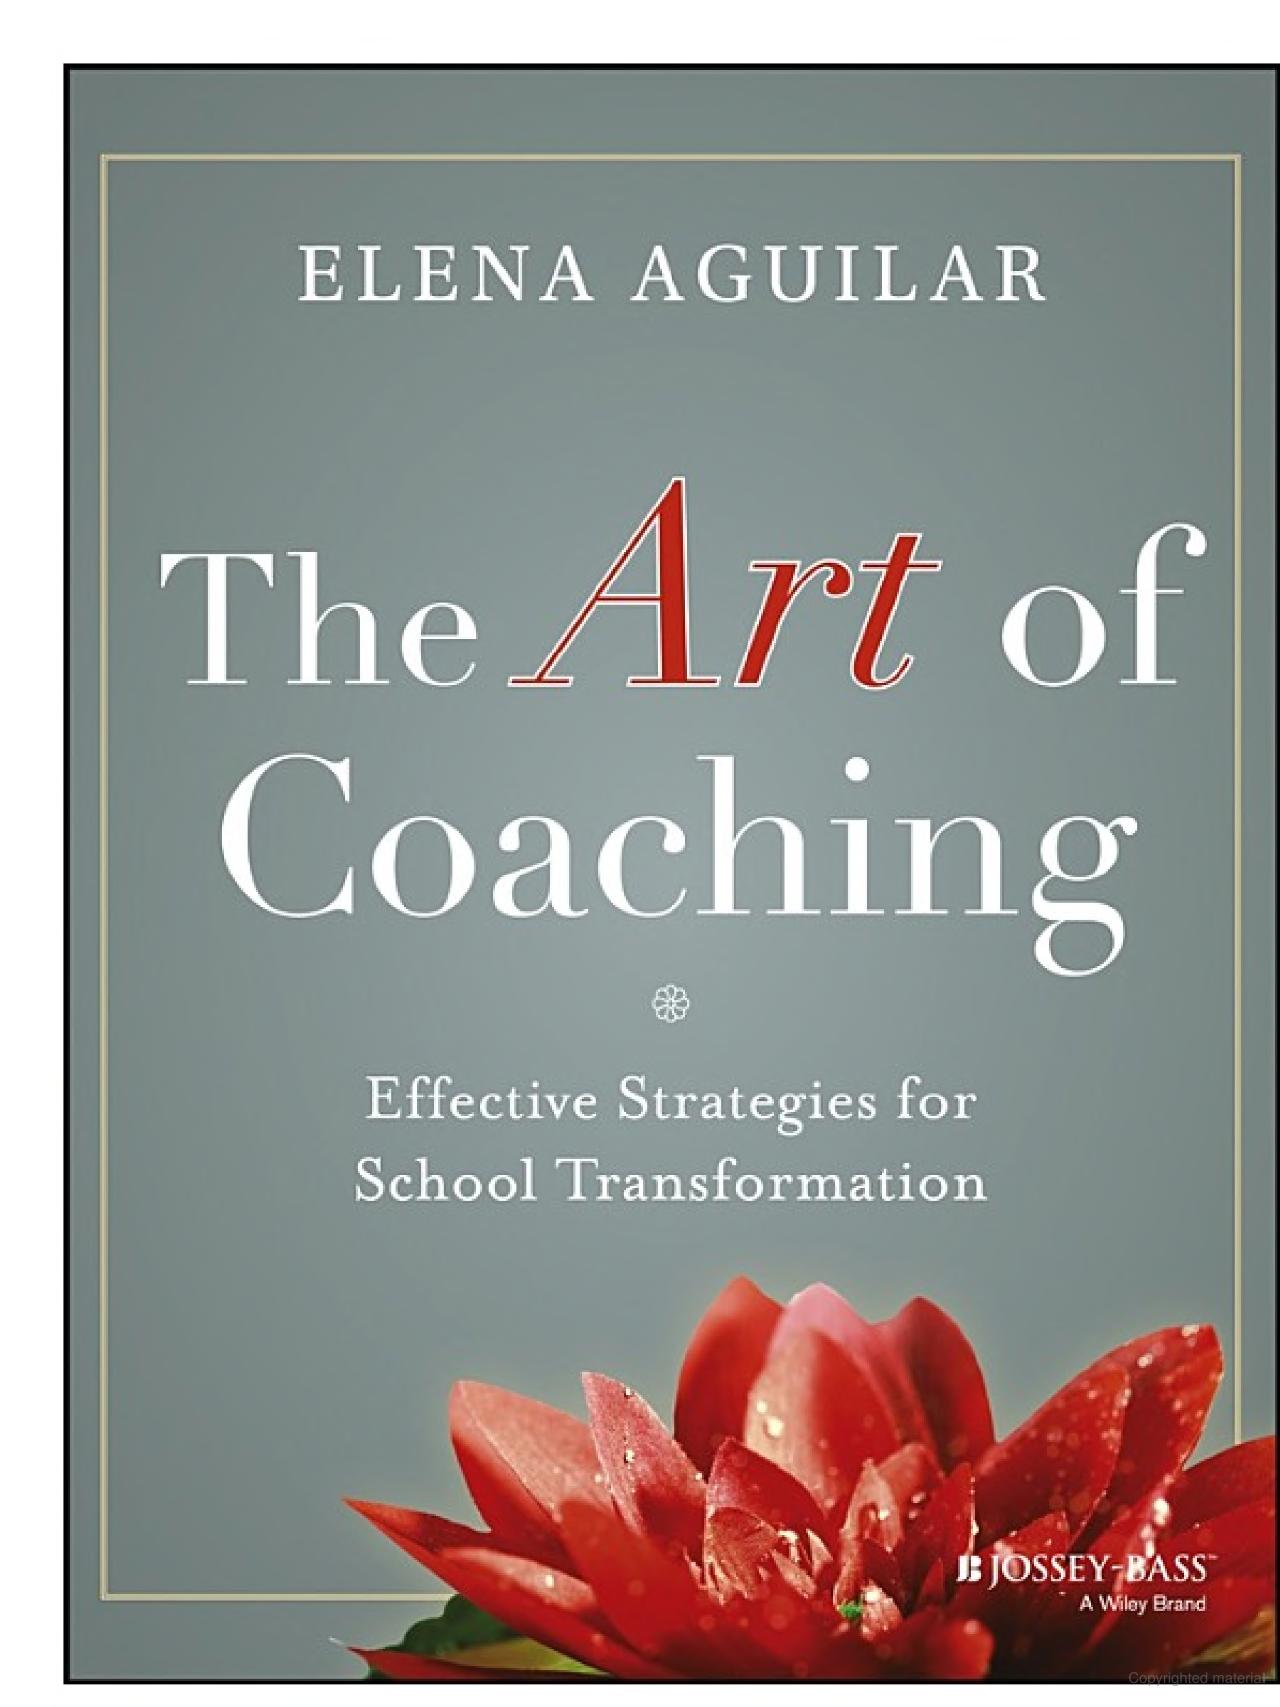 Book cover with red flower titled "The Art of Coaching" by elena Aguilar